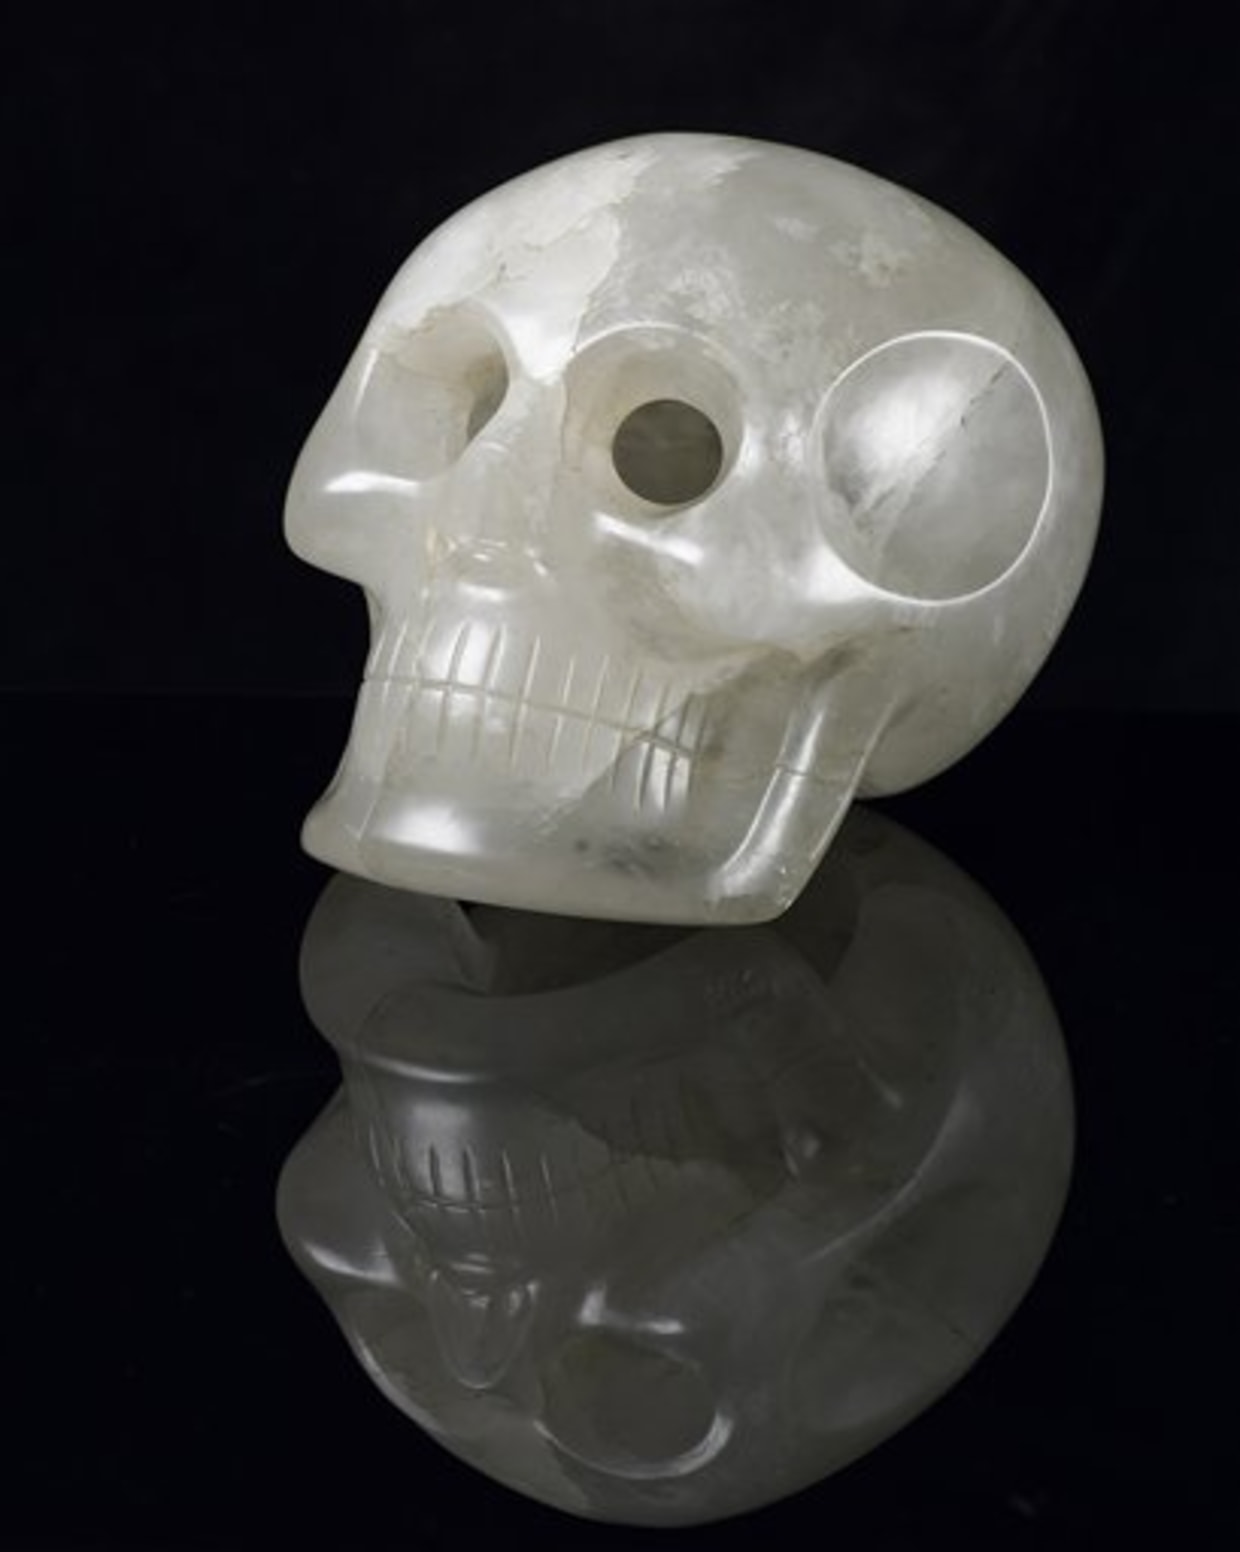 Why such a fascination with crystal skulls?